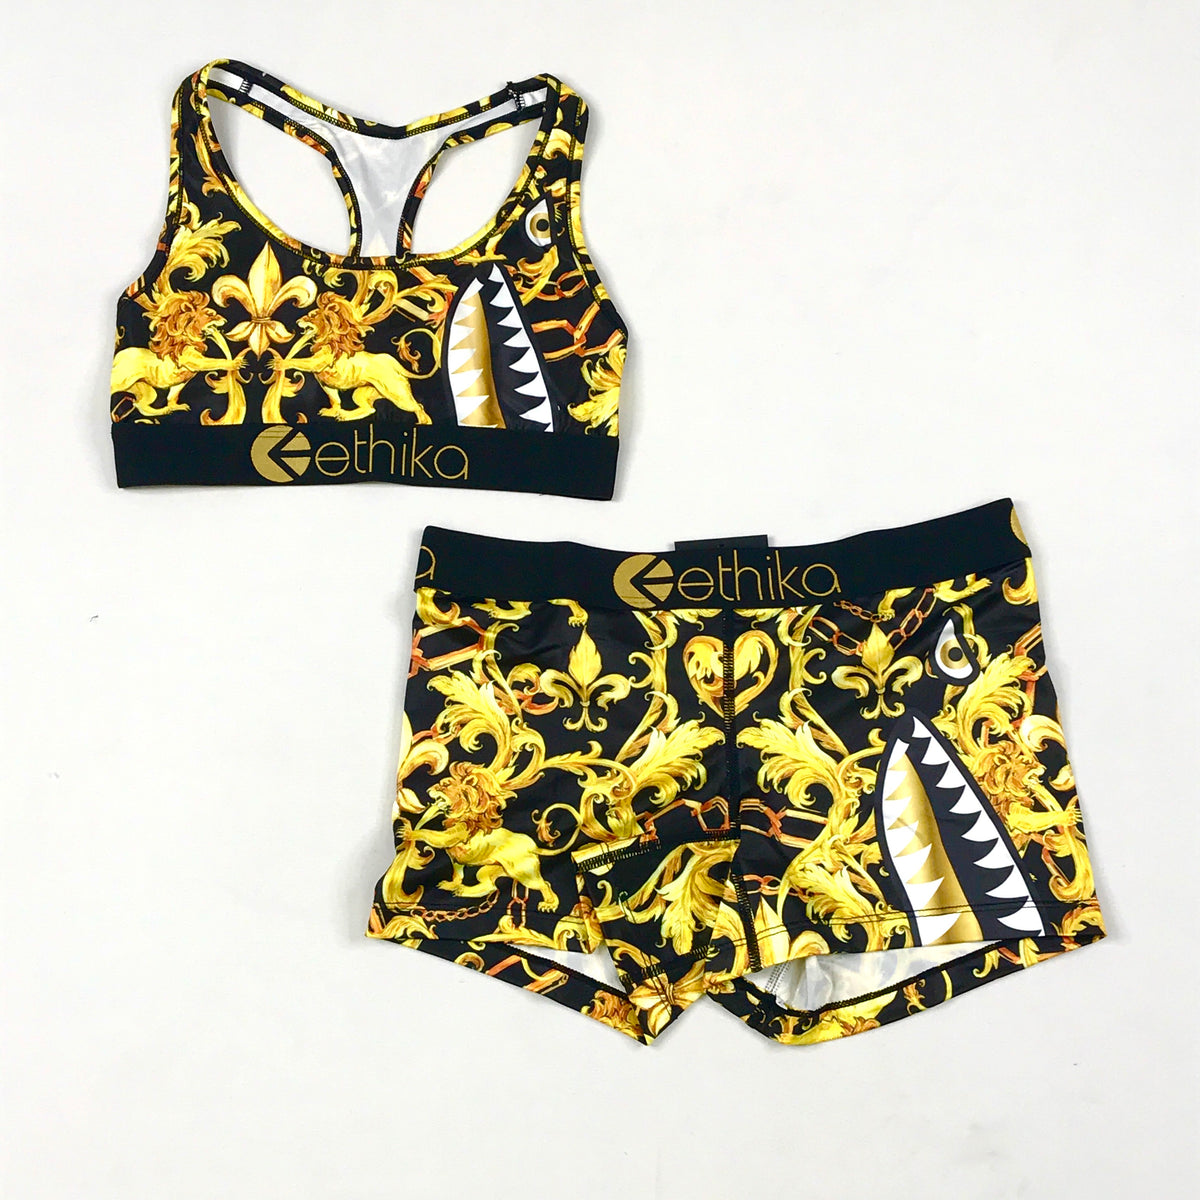 Ethika Staple boxer brief and sports bra set in bomber golden (1543) –  R.O.K. Island Clothing